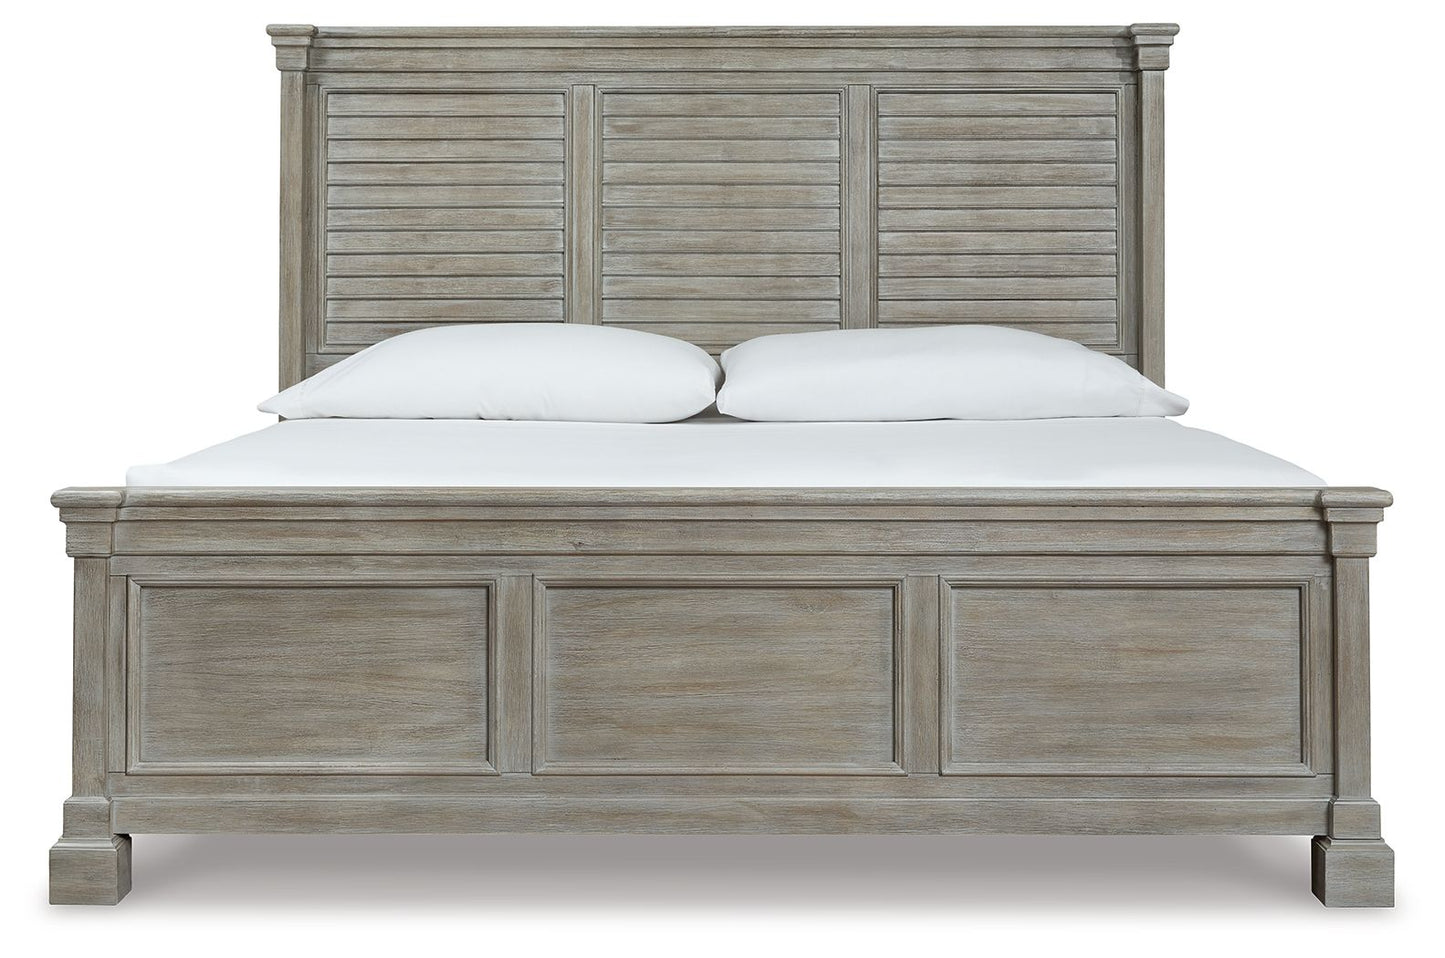 Moreshire - Panel Bed